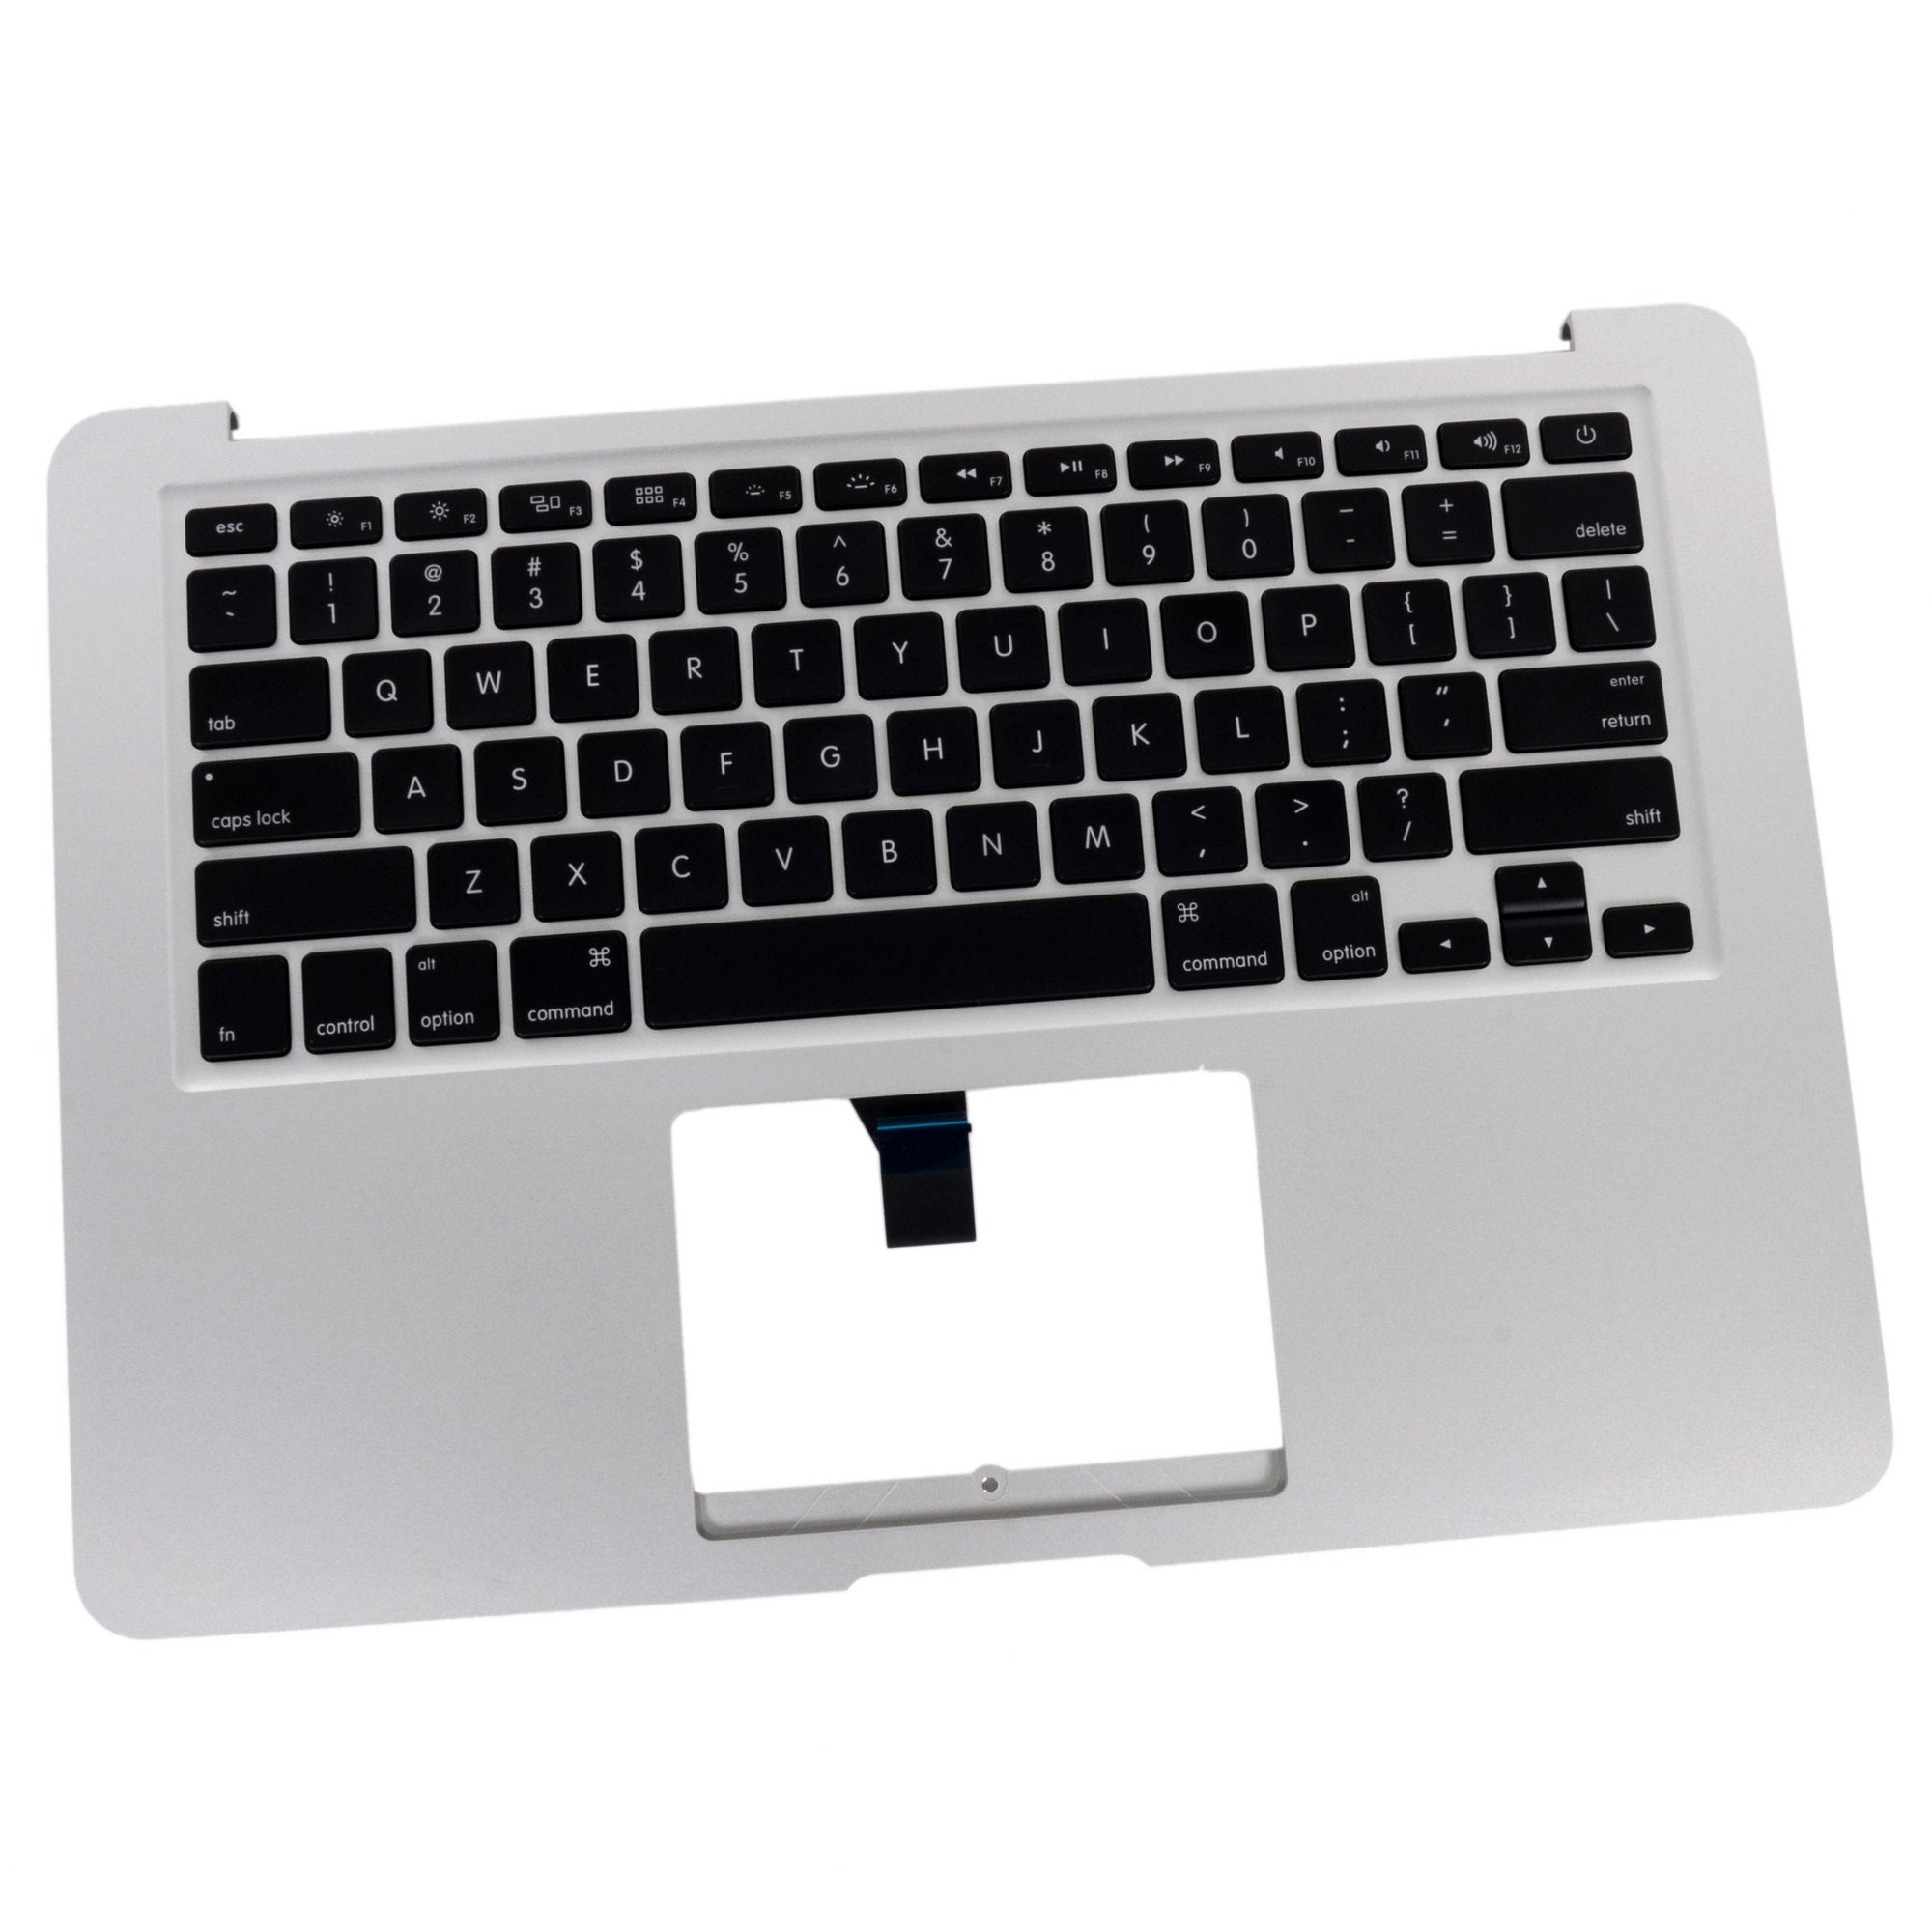 MacBook Air 13" (Mid 2012) Upper Case with Keyboard